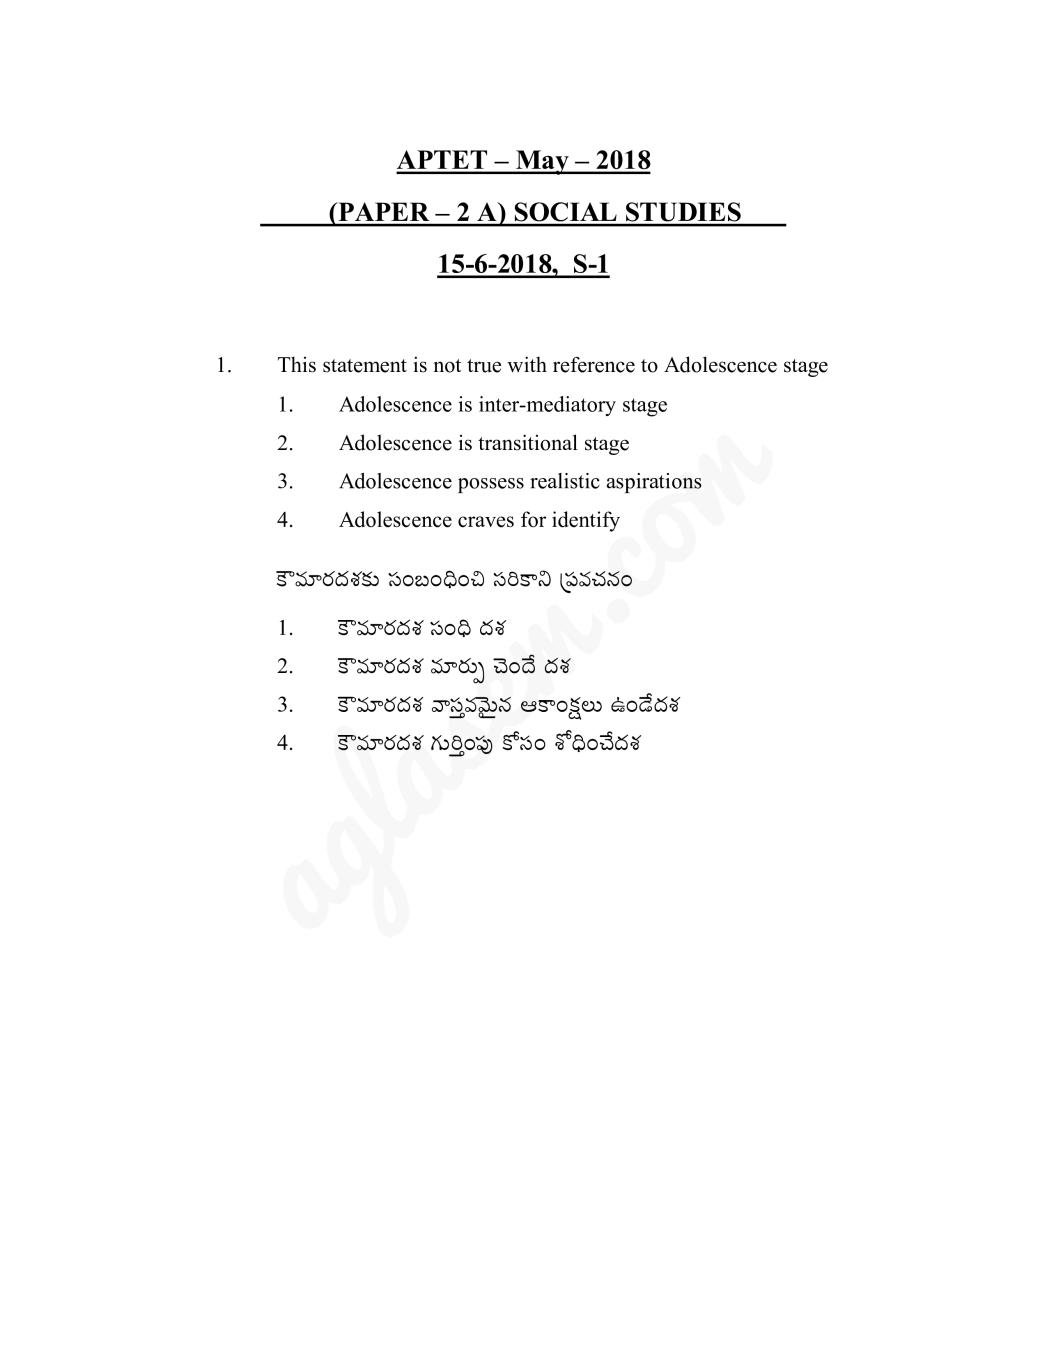 APTET Question Paper with Answers 15 Jun 2018 Paper 2 Social Science (Shift 1) - Page 1